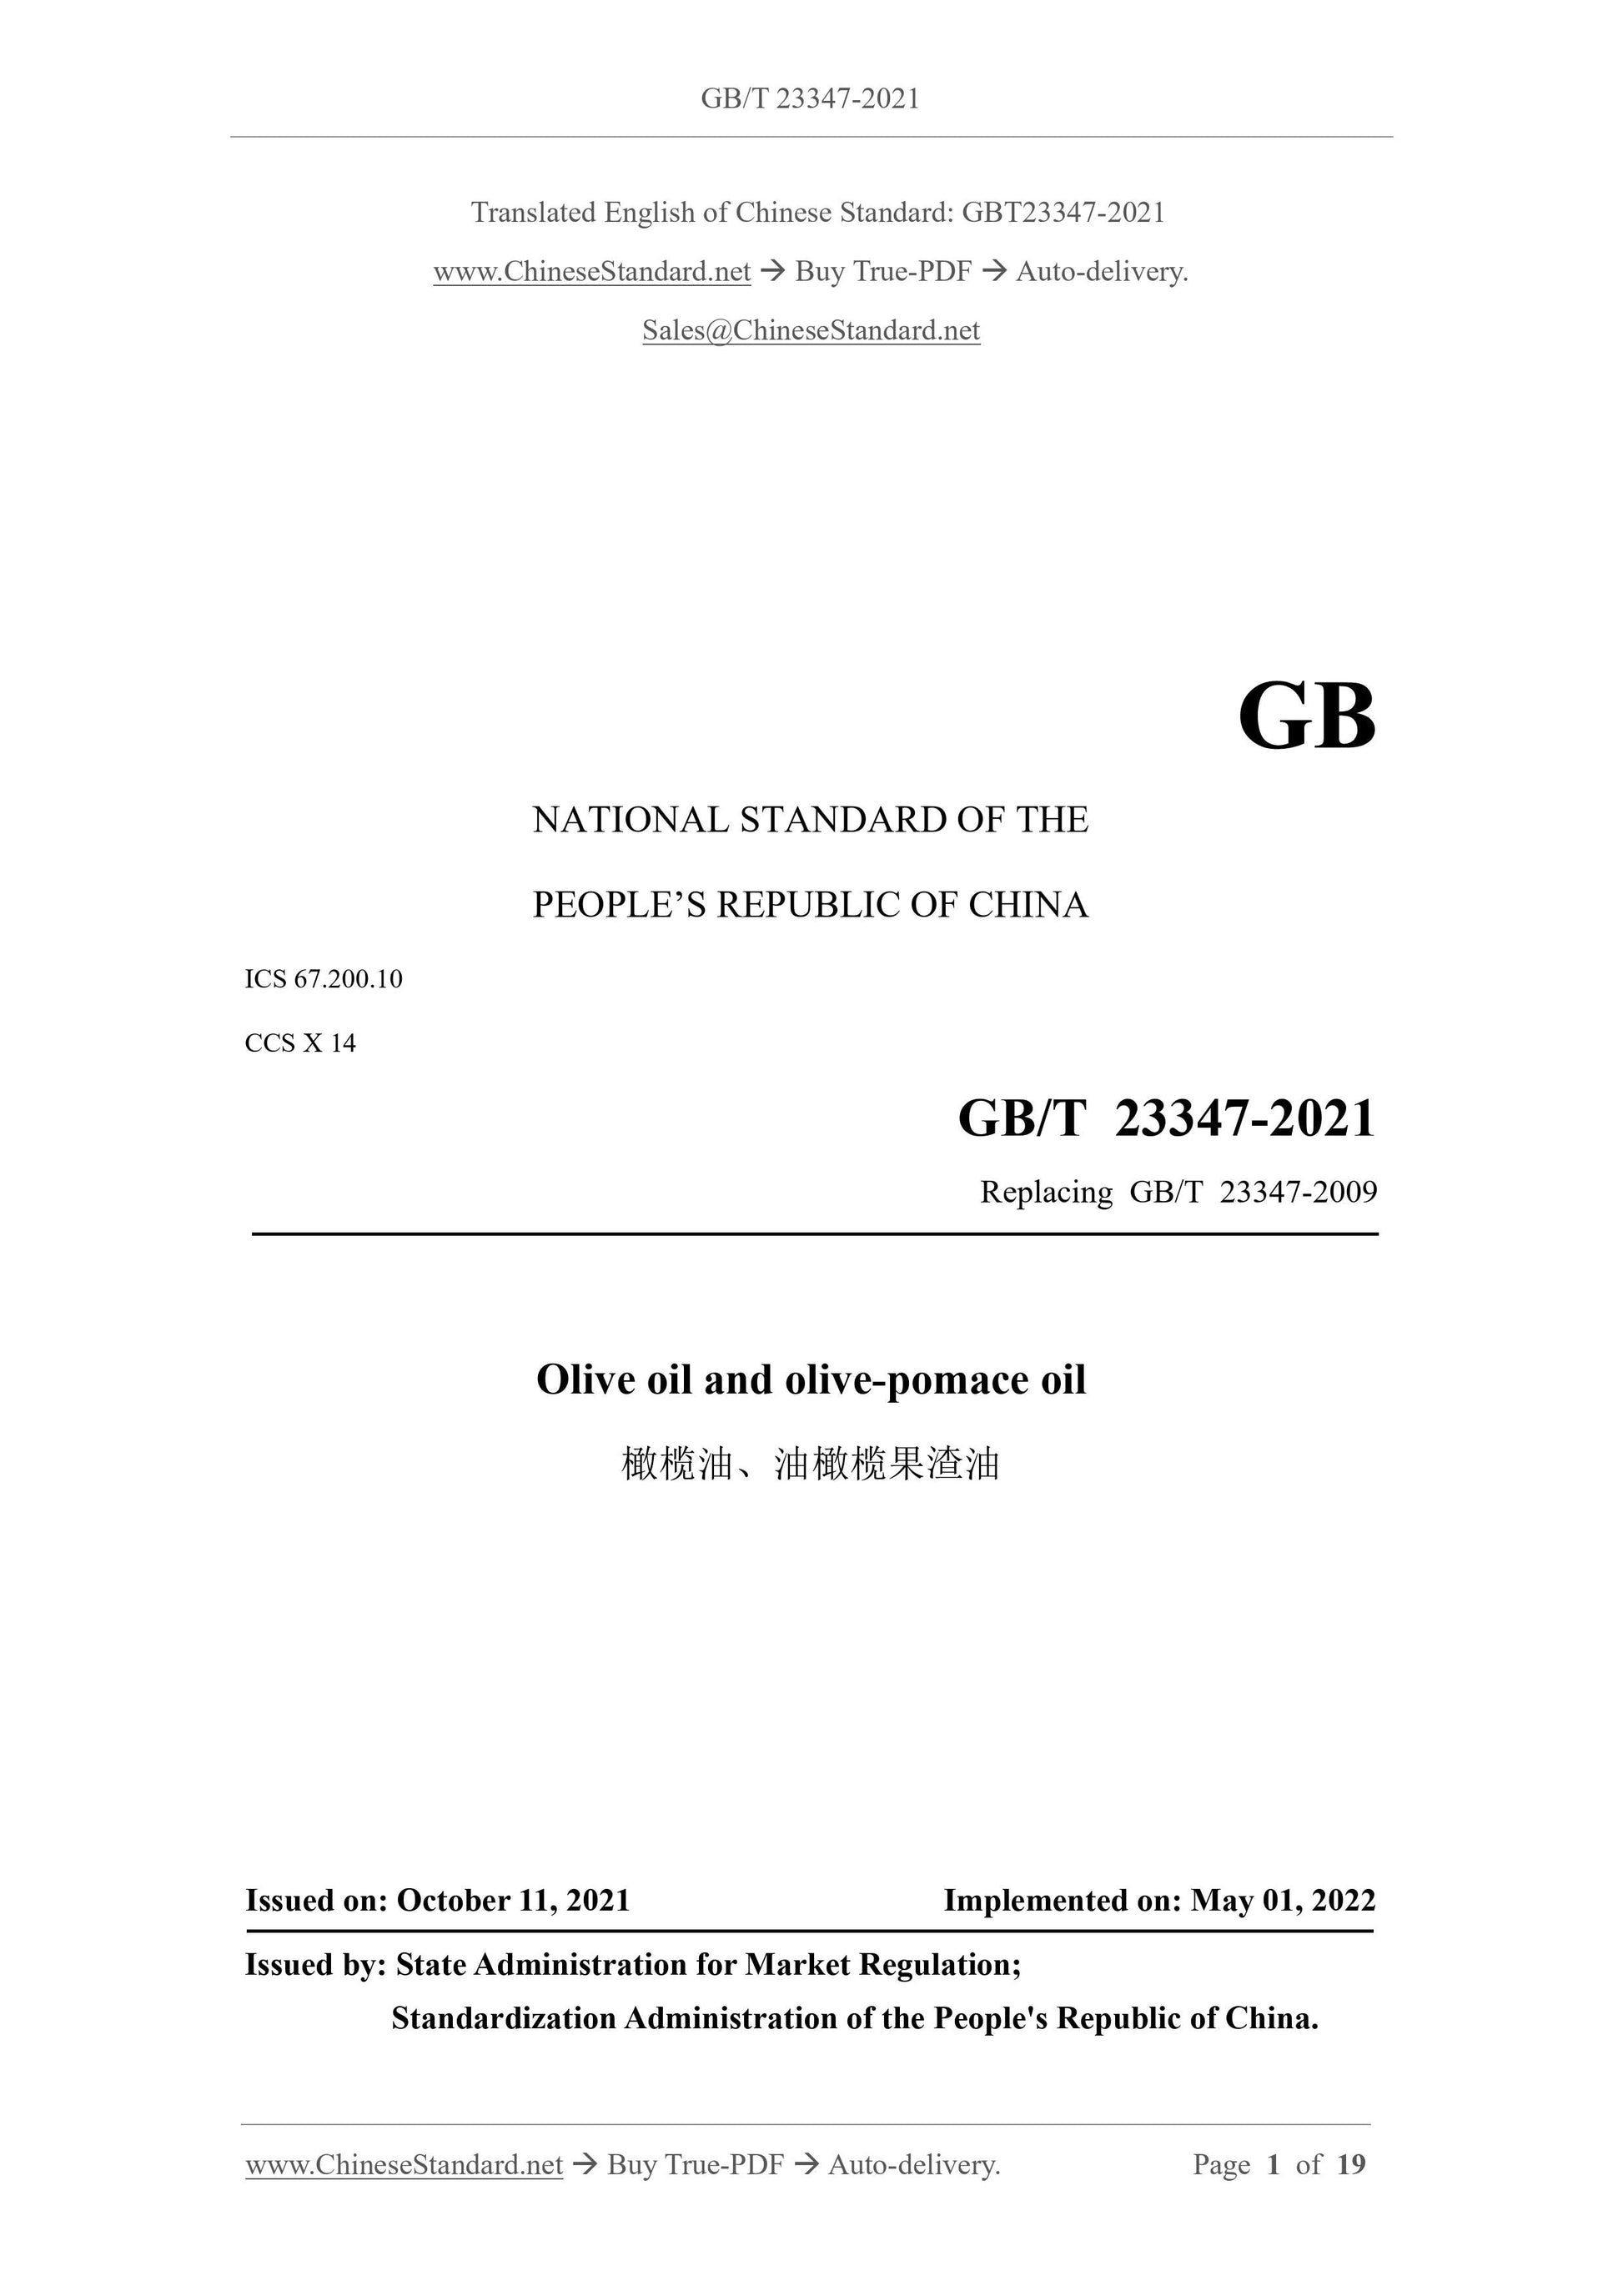 GB/T 23347-2021 Page 1